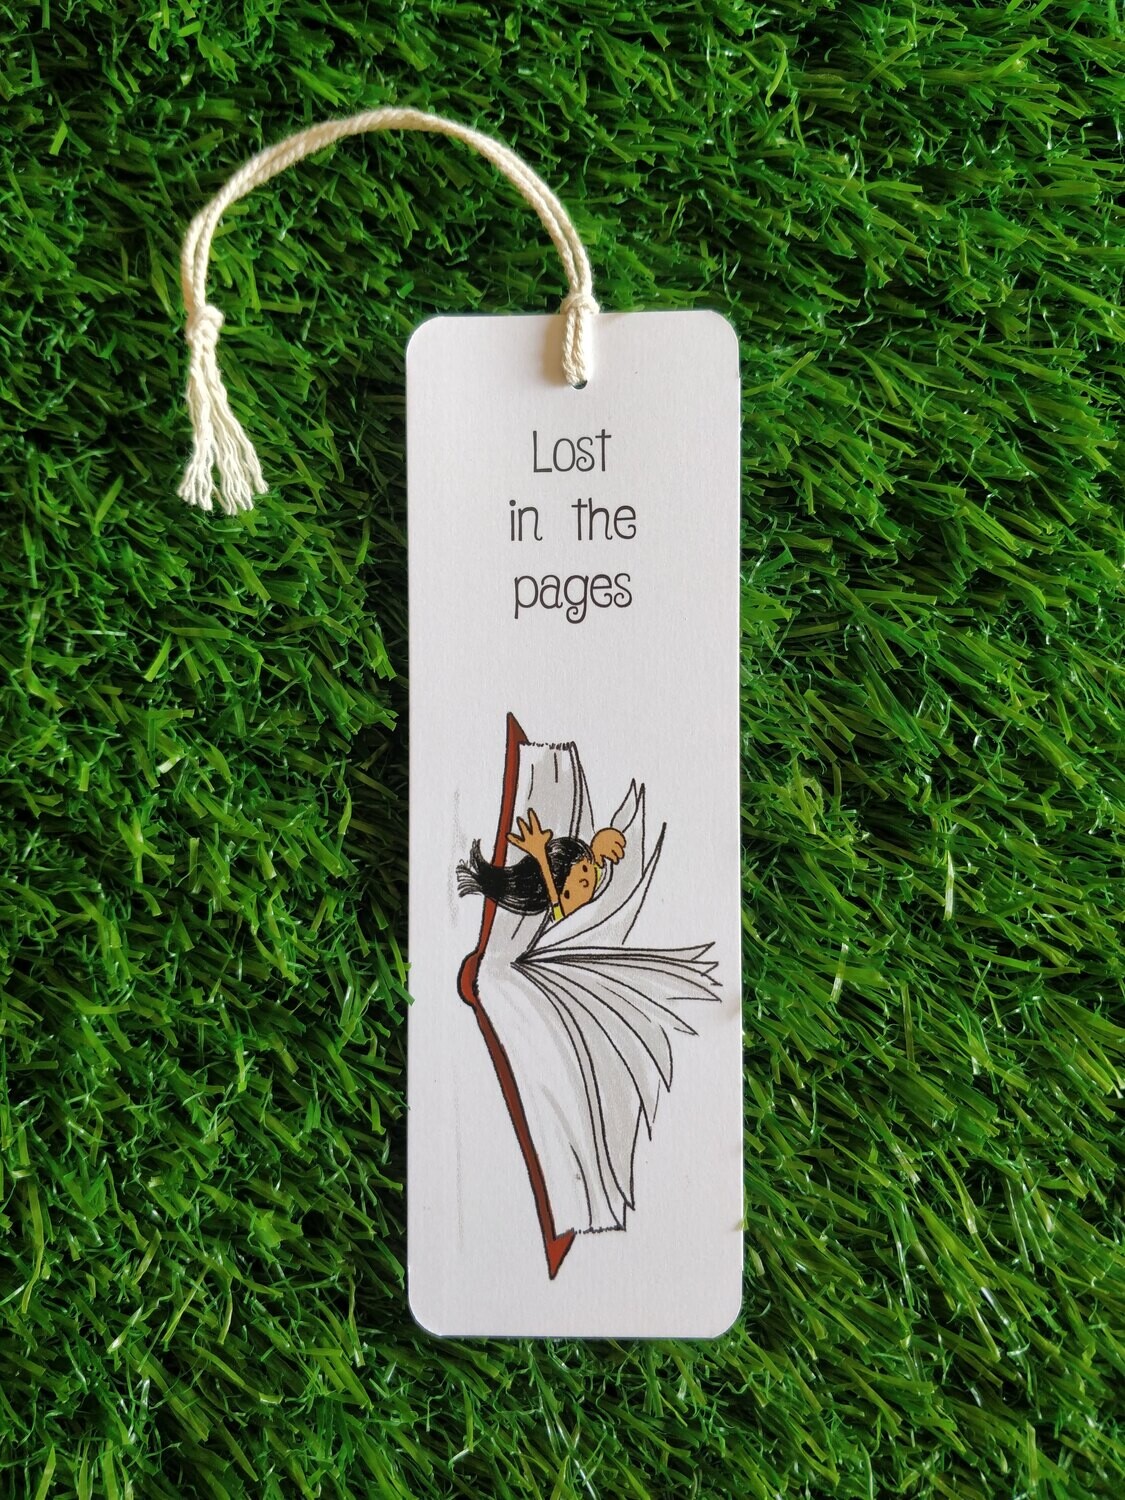 "Lost in the pages" - BOOKMARK